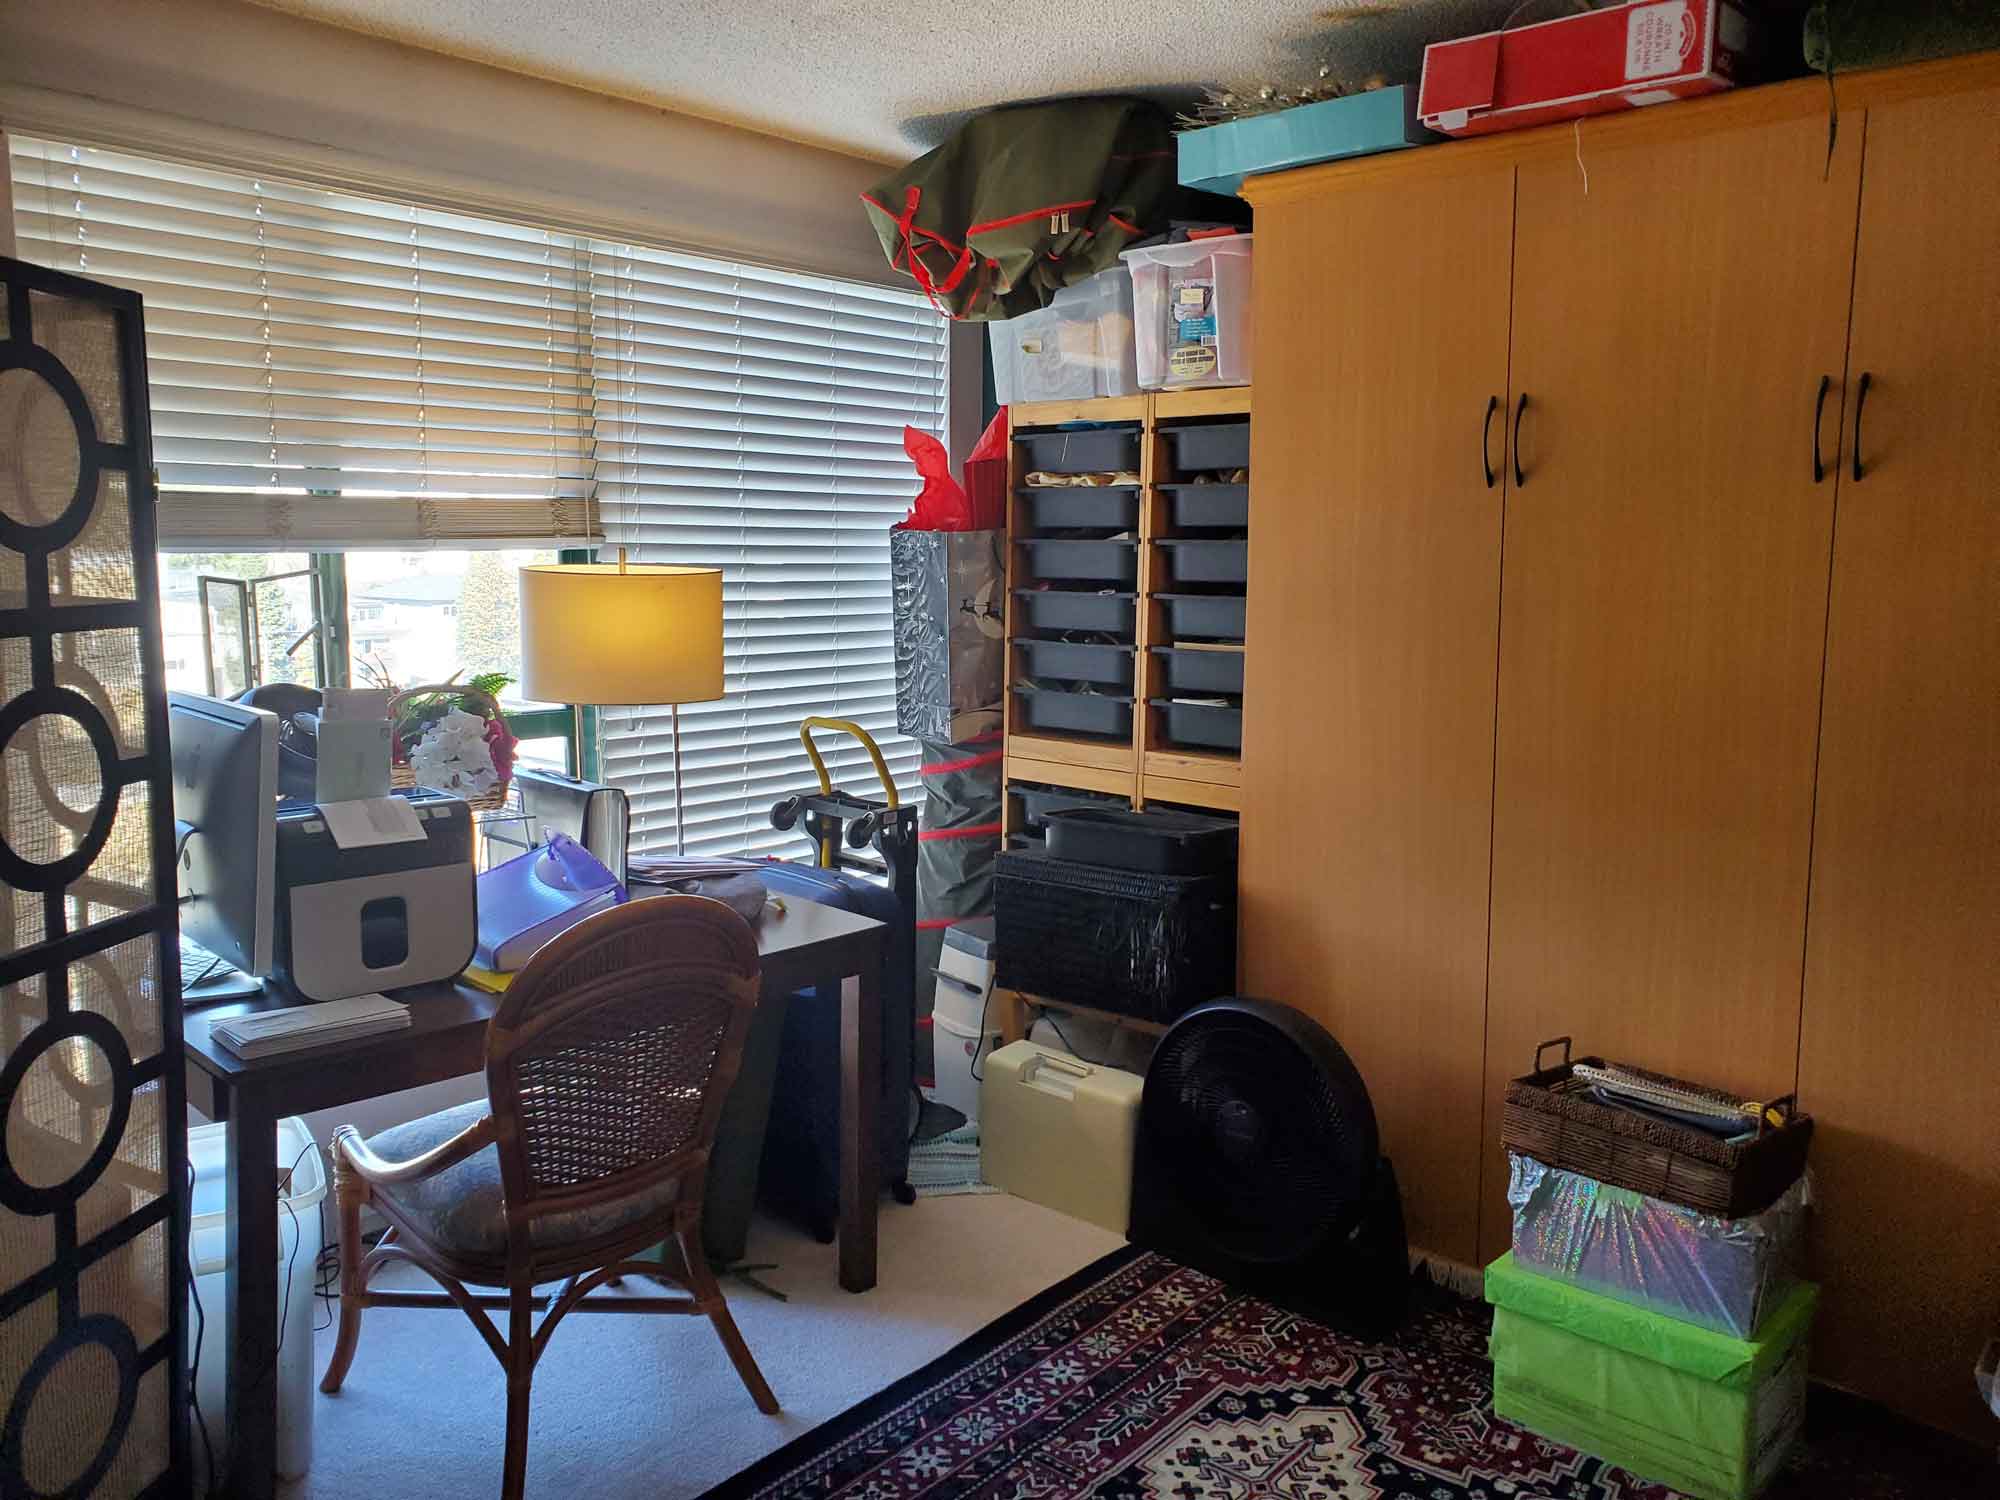 A spare room with boxes piled in various areas of the floor and on a desk